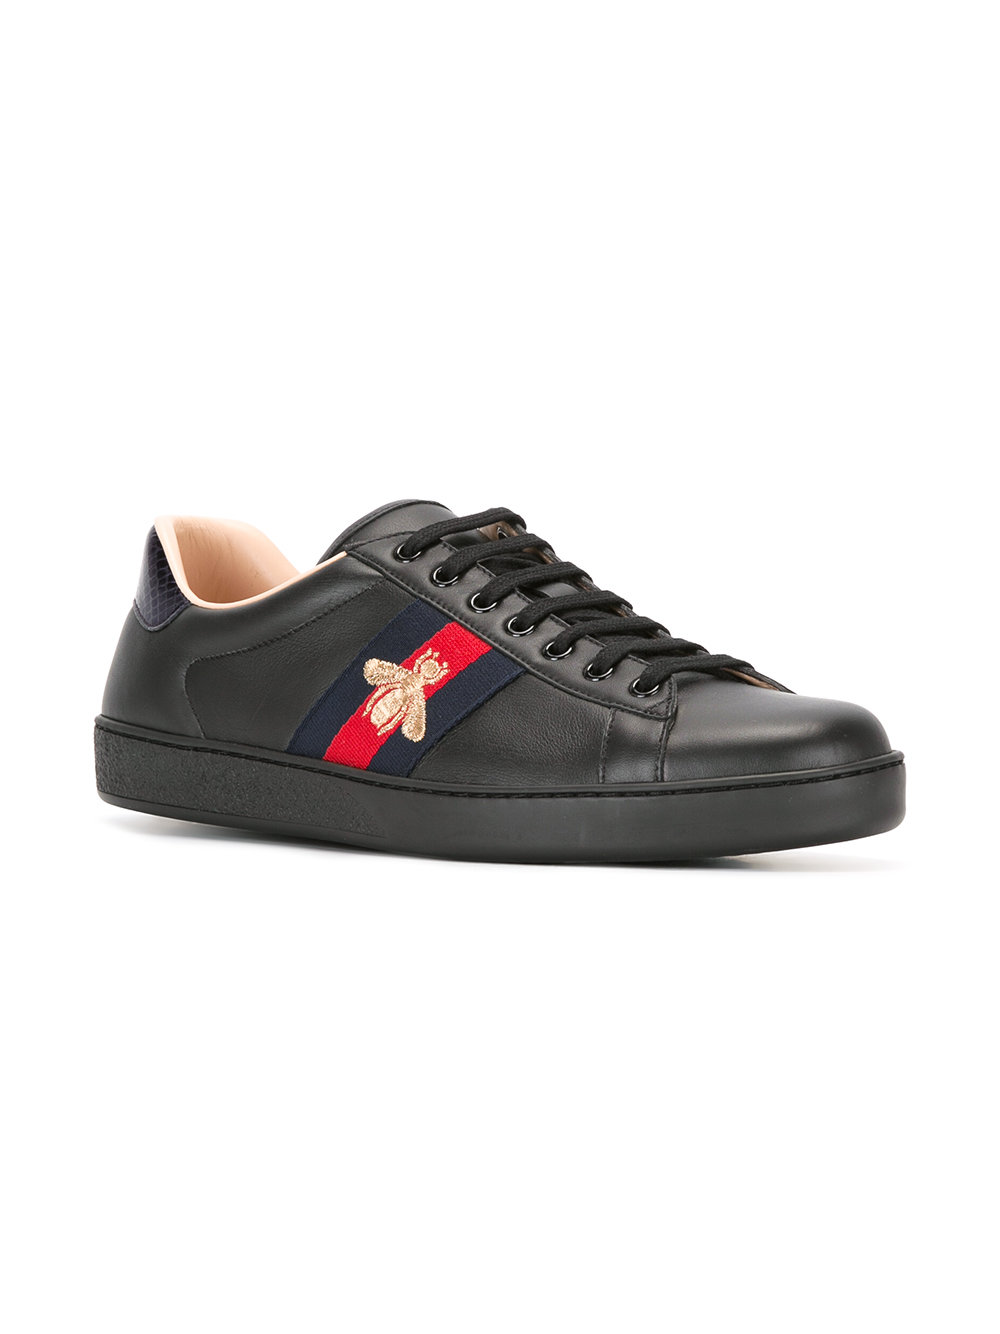 gucci sneakers online